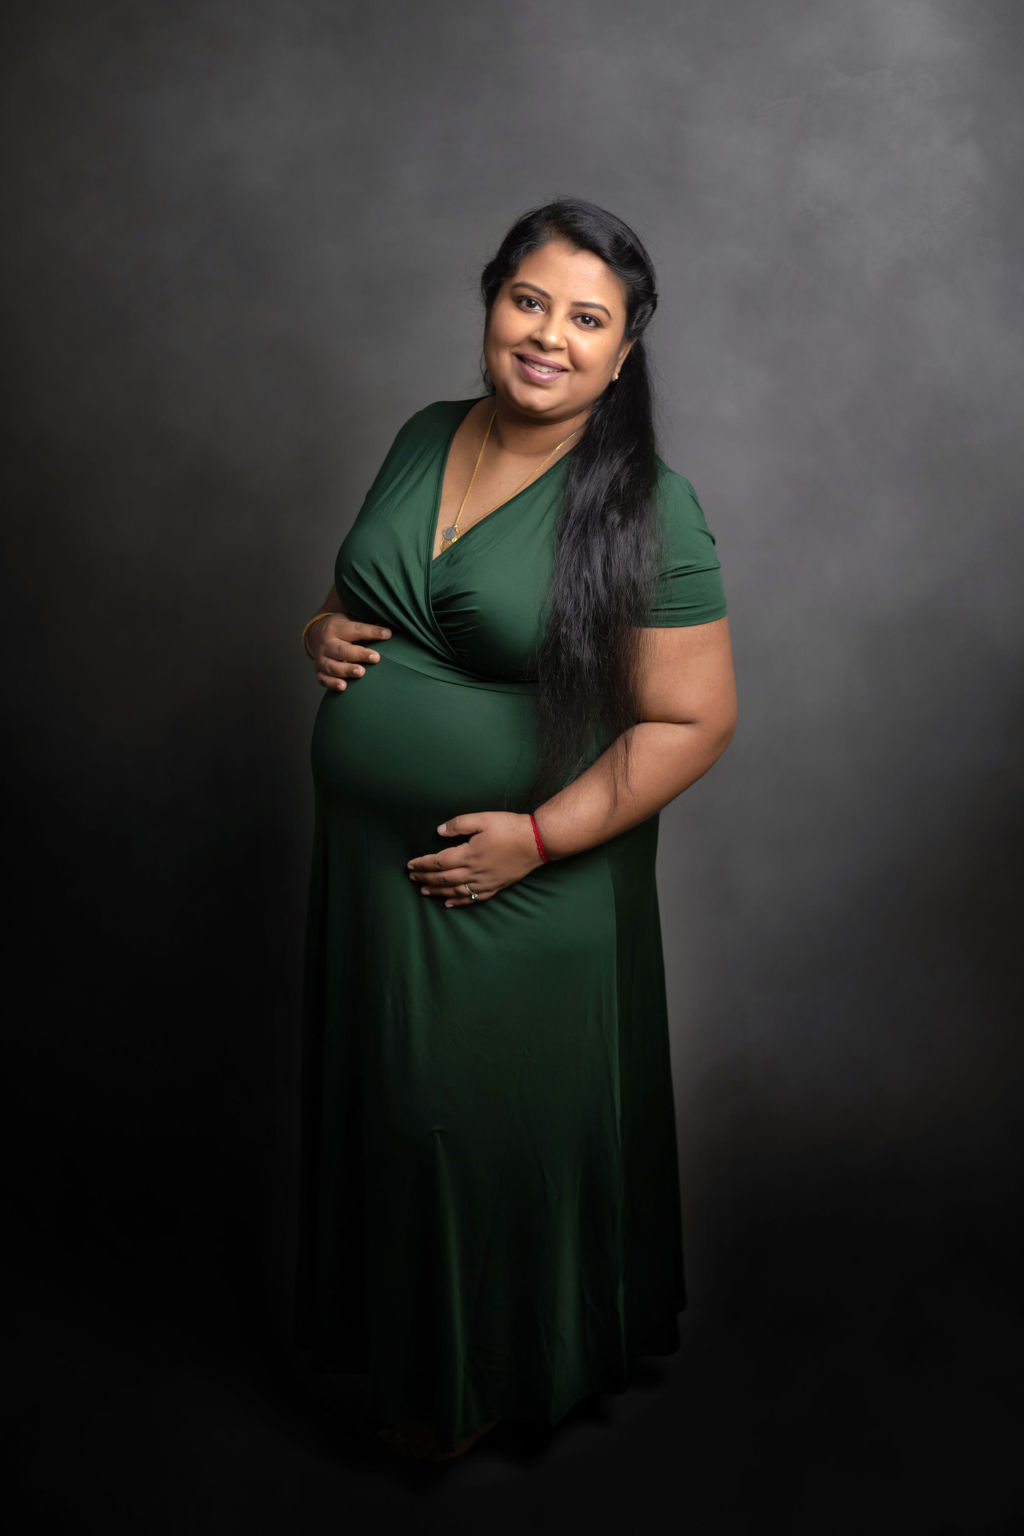 A mother to be in a green maternity gown stands in a studio holding her bump after meeting community care midwives